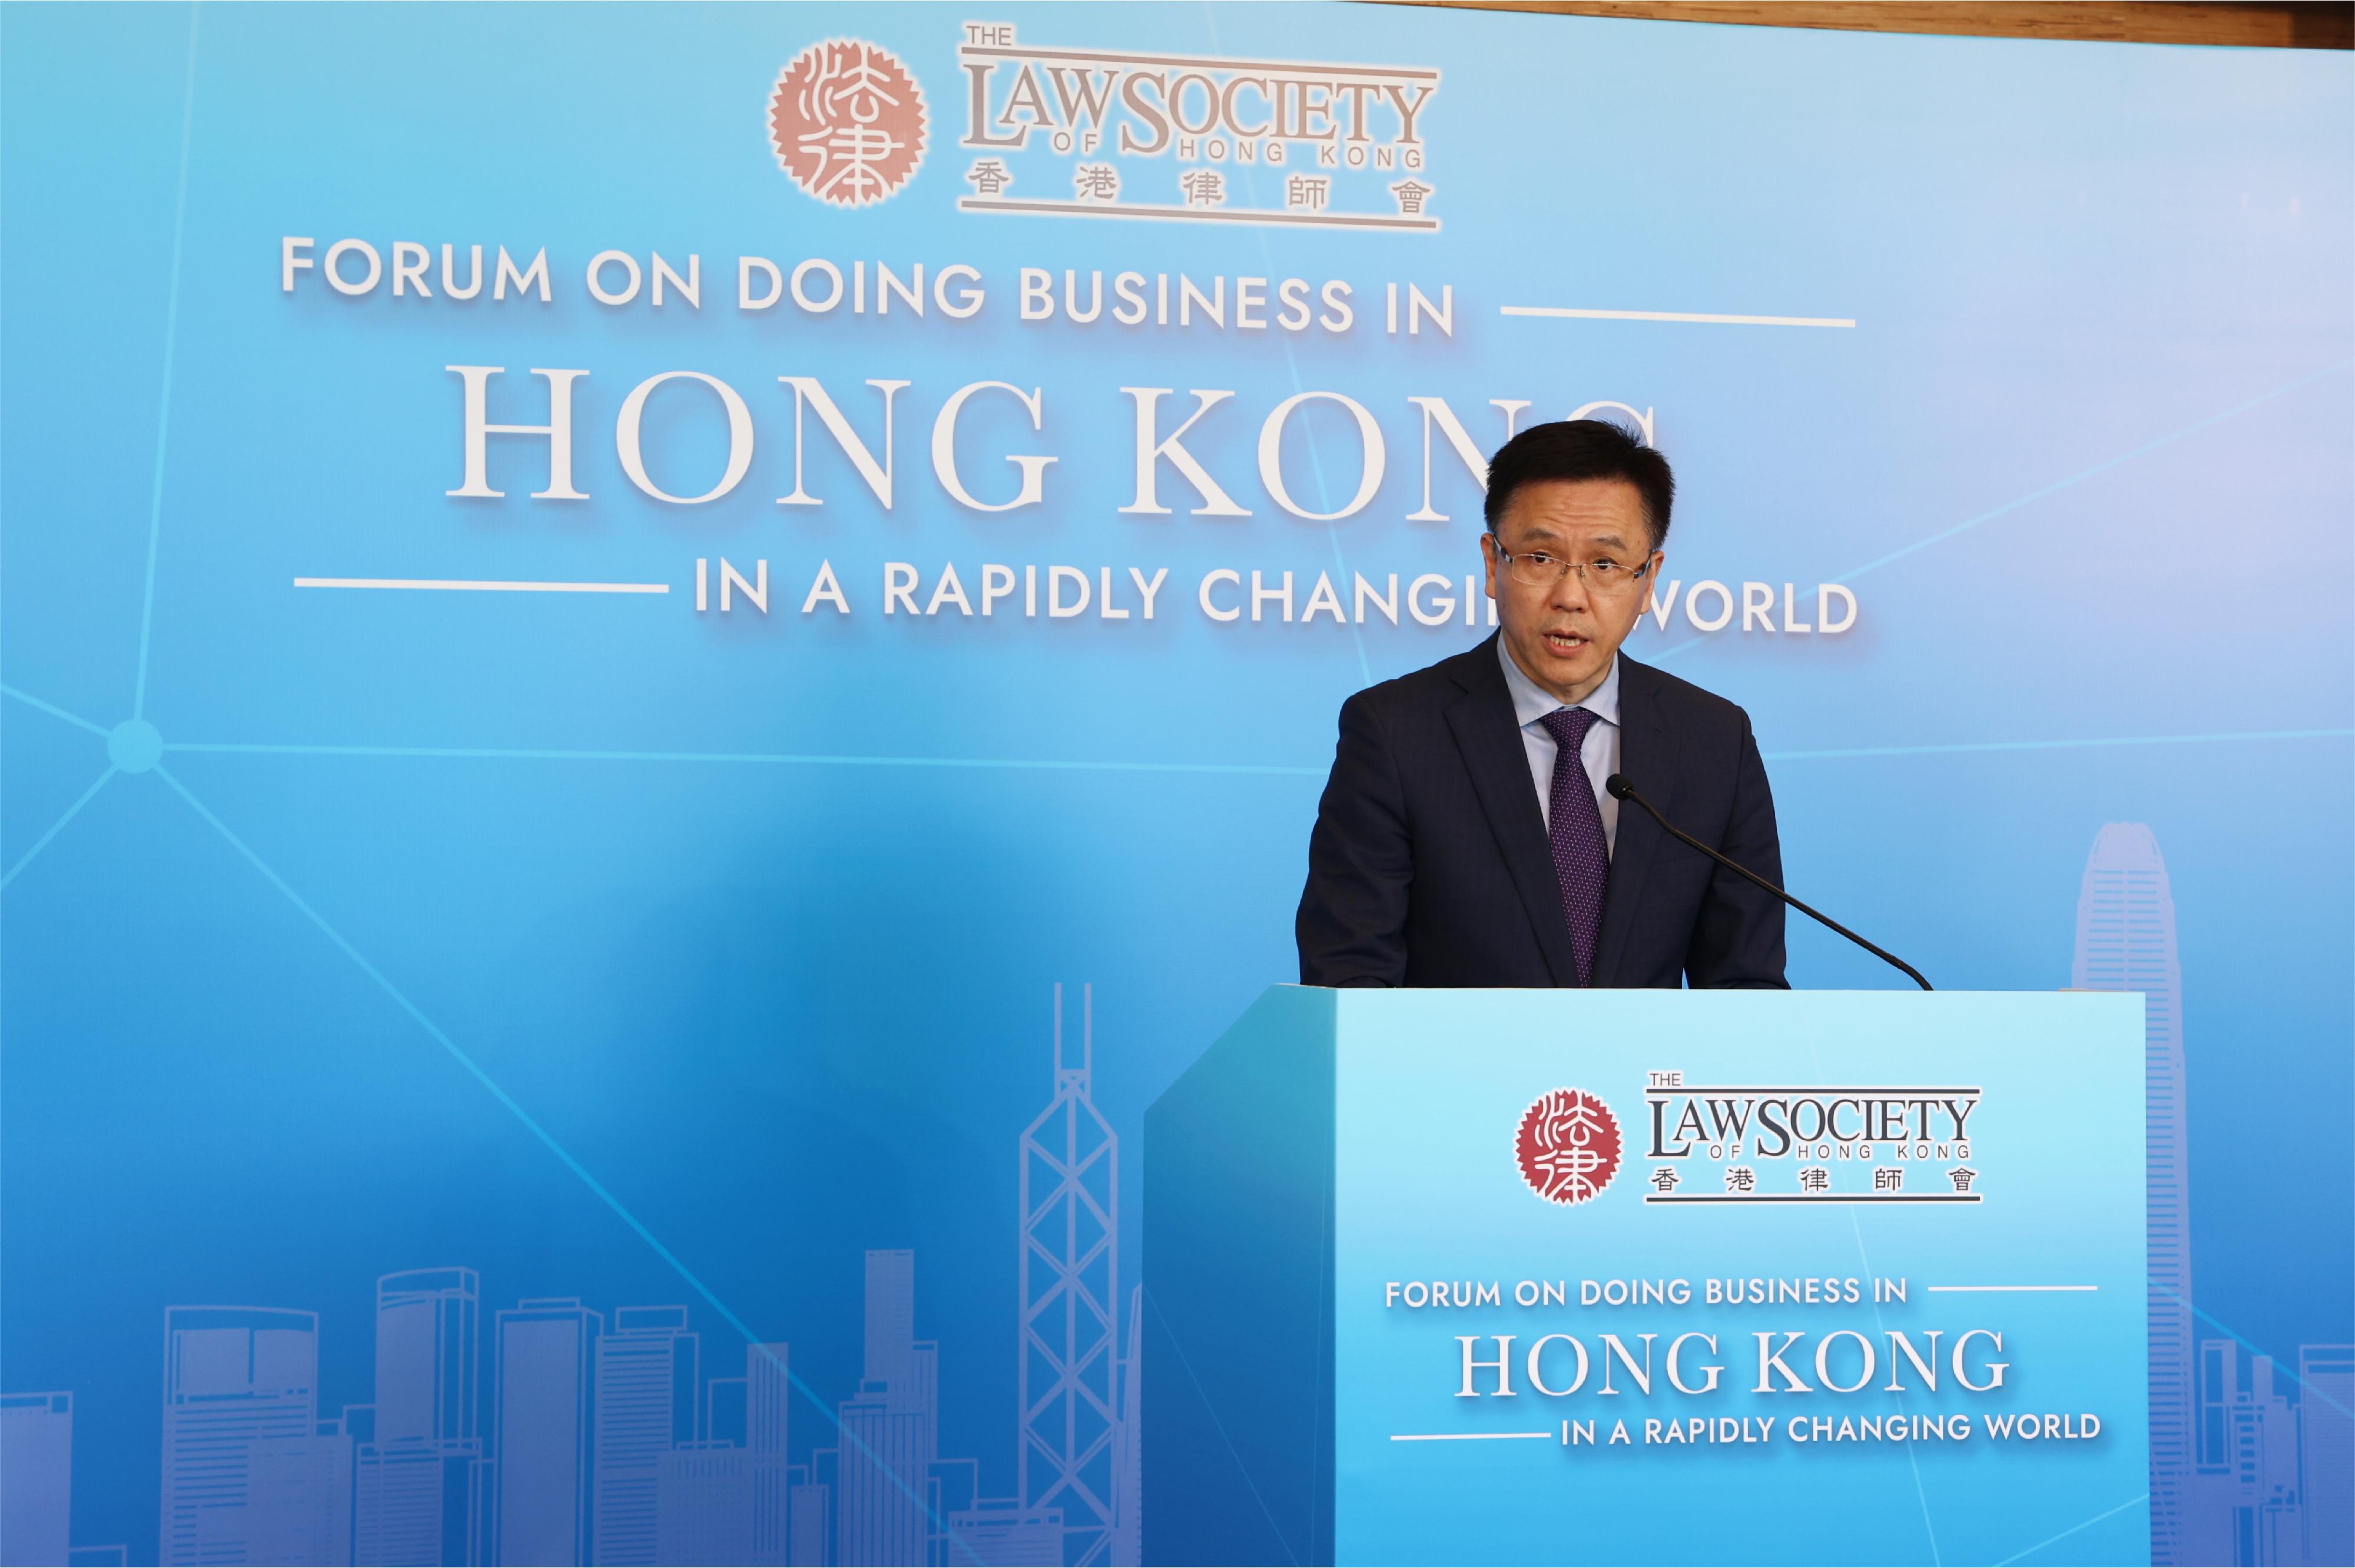 The Secretary for Innovation, Technology and Industry, Professor Sun Dong, delivers a keynote speech at the luncheon of the Law Society of Hong Kong's Forum on Doing Business in Hong Kong in a Rapidly Changing World today (July 11).